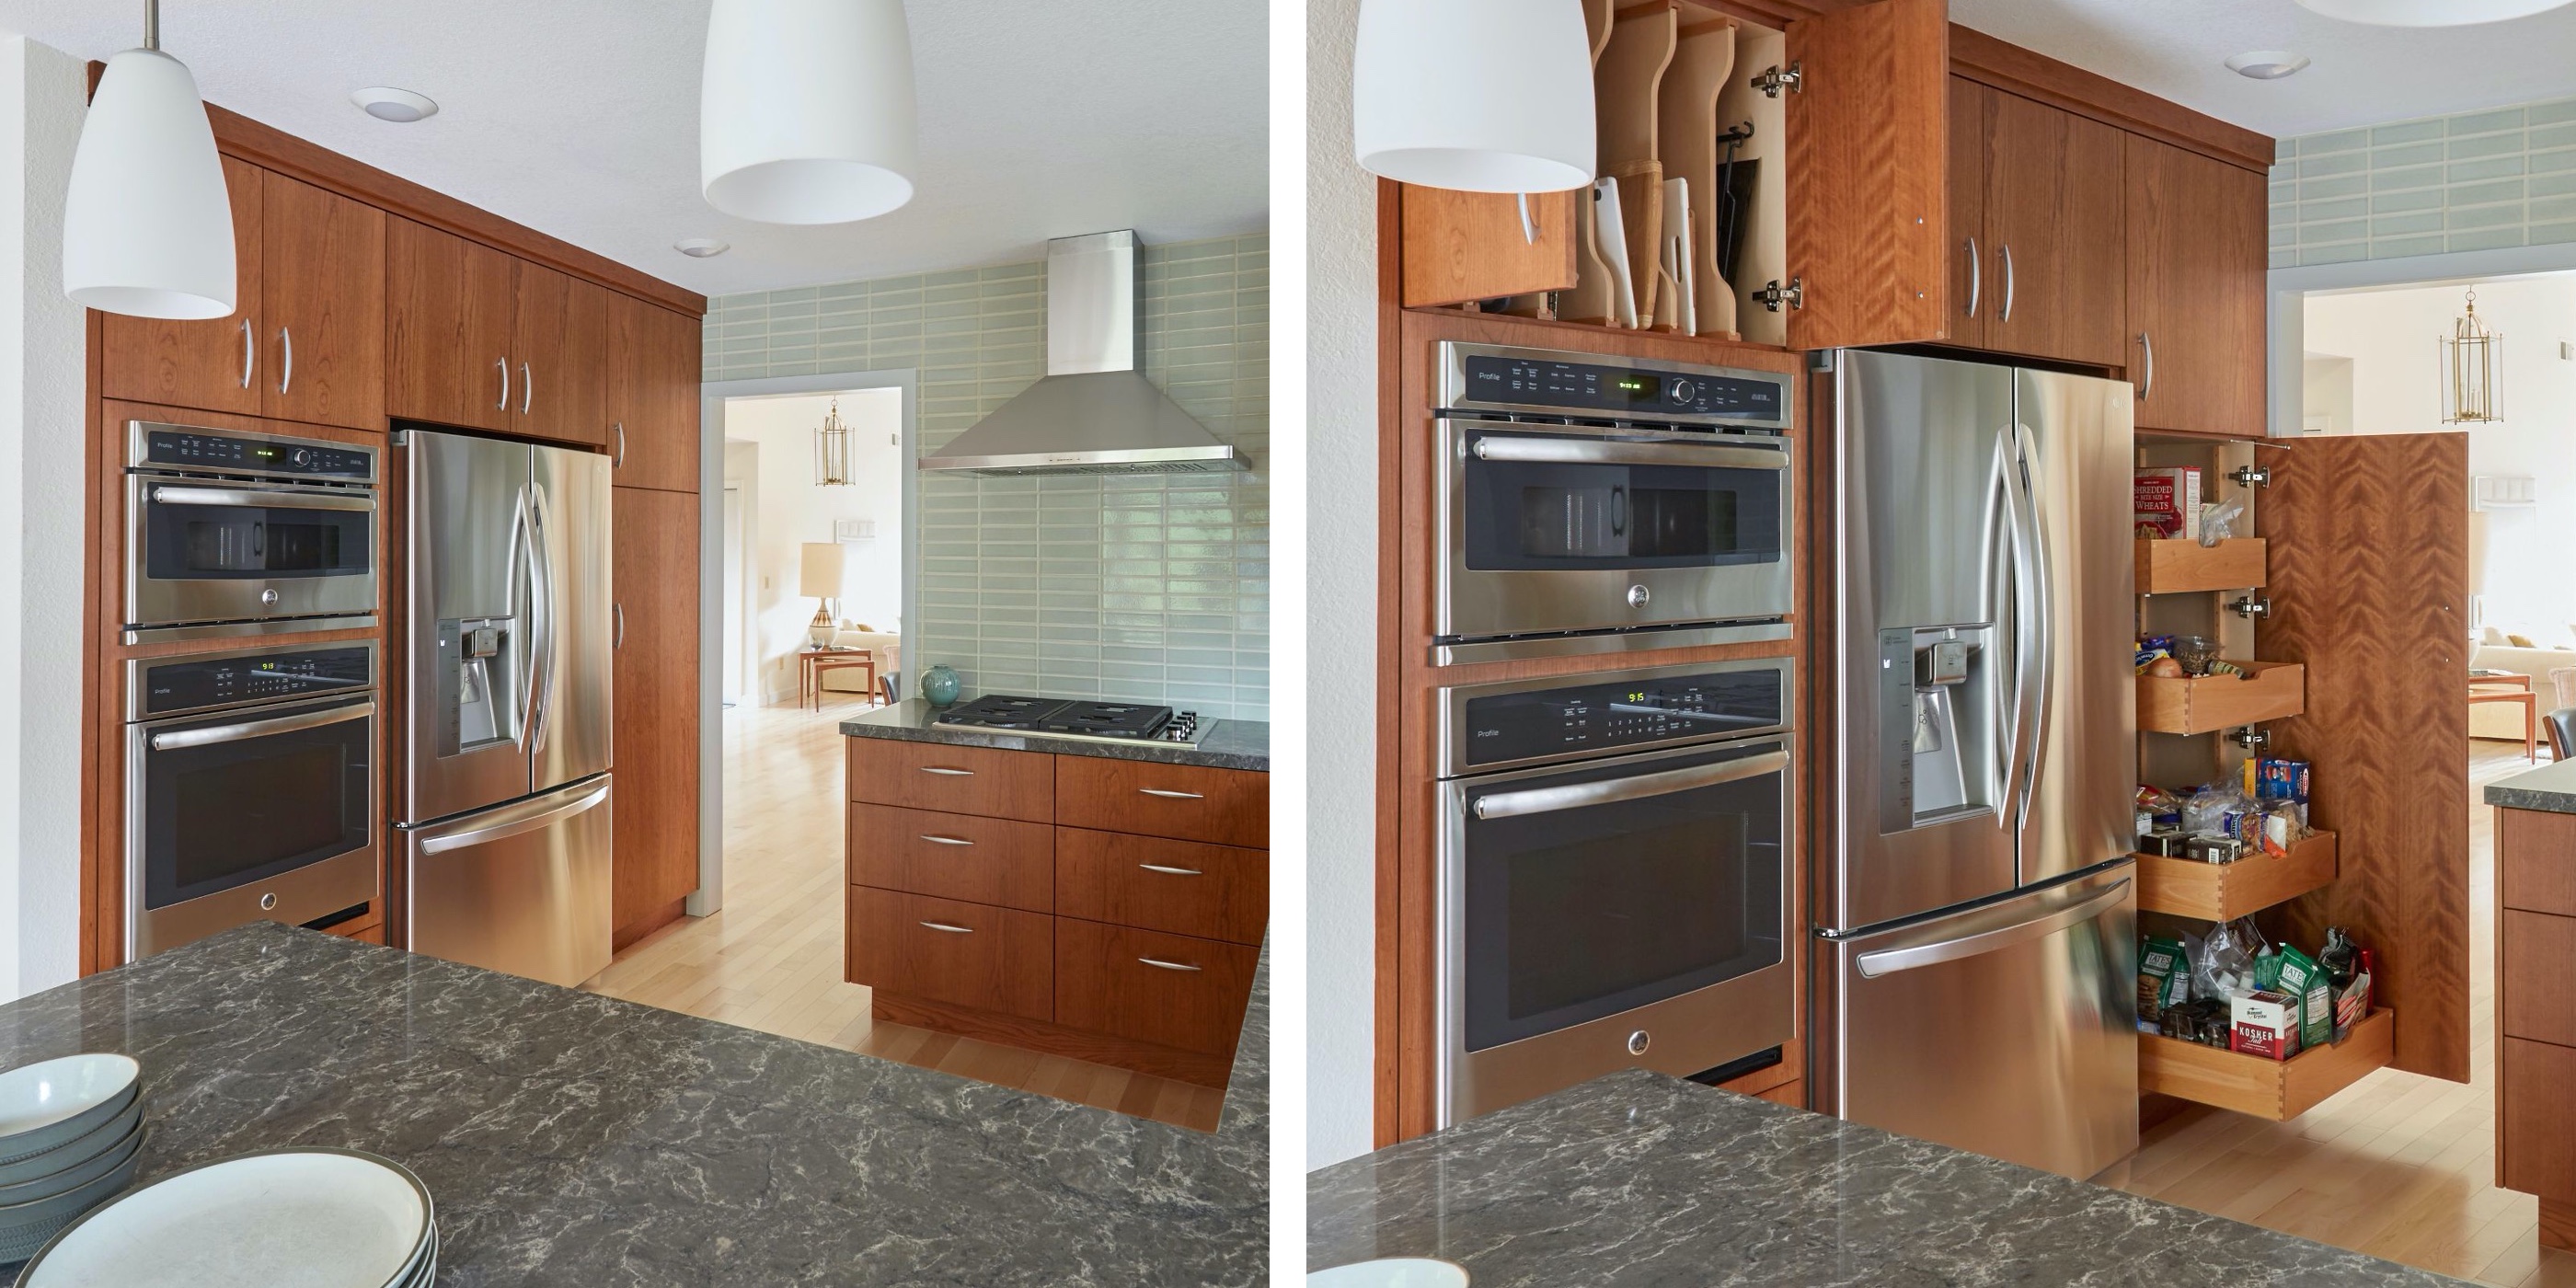  5 Design Elements That Will Revitalize Your Kitchen in the East Bay - Kitchen Renovation - Custom cabinetry - Custom Kitchens